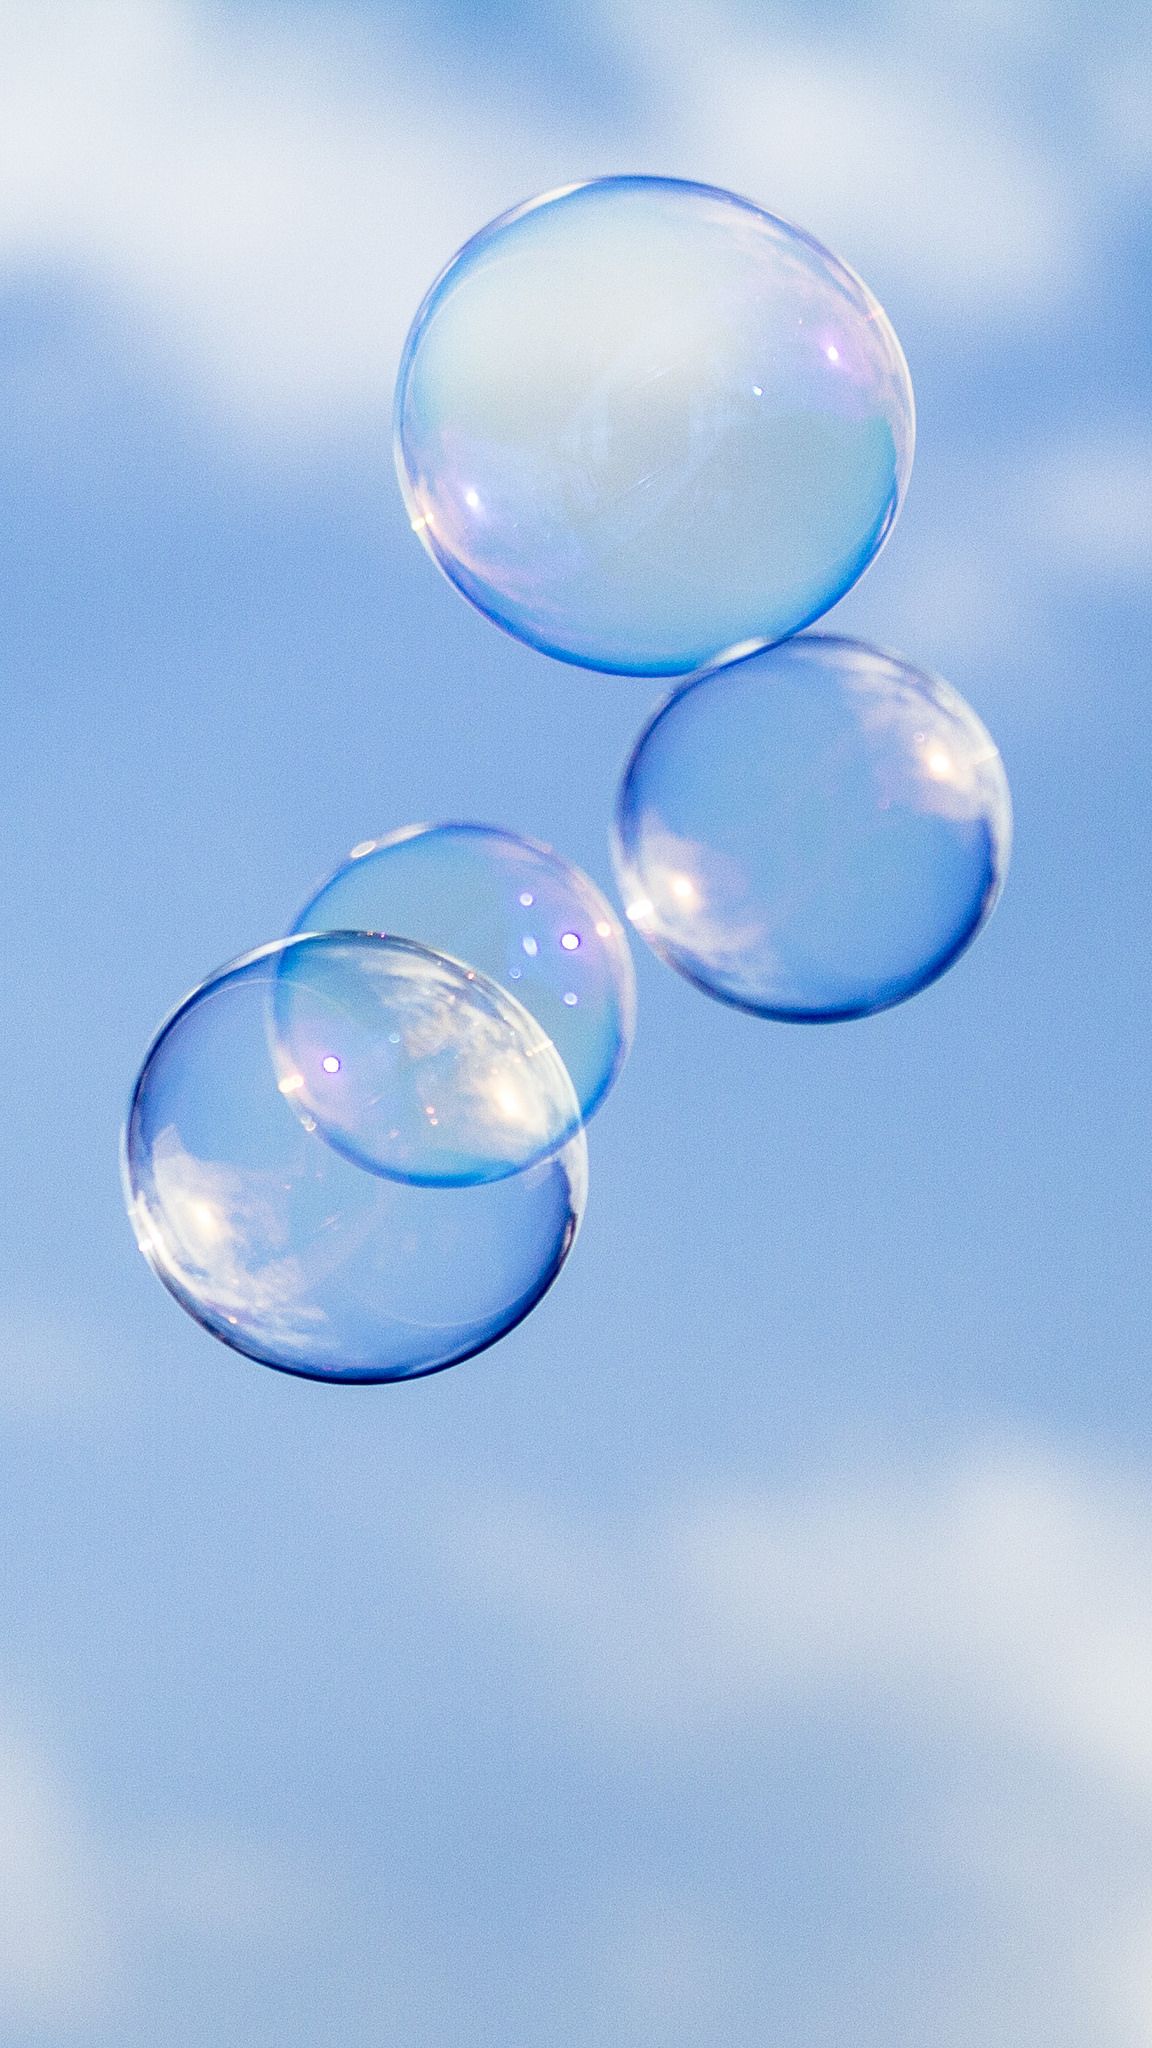 Three bubbles floating in the air against a blue sky - Bubbles